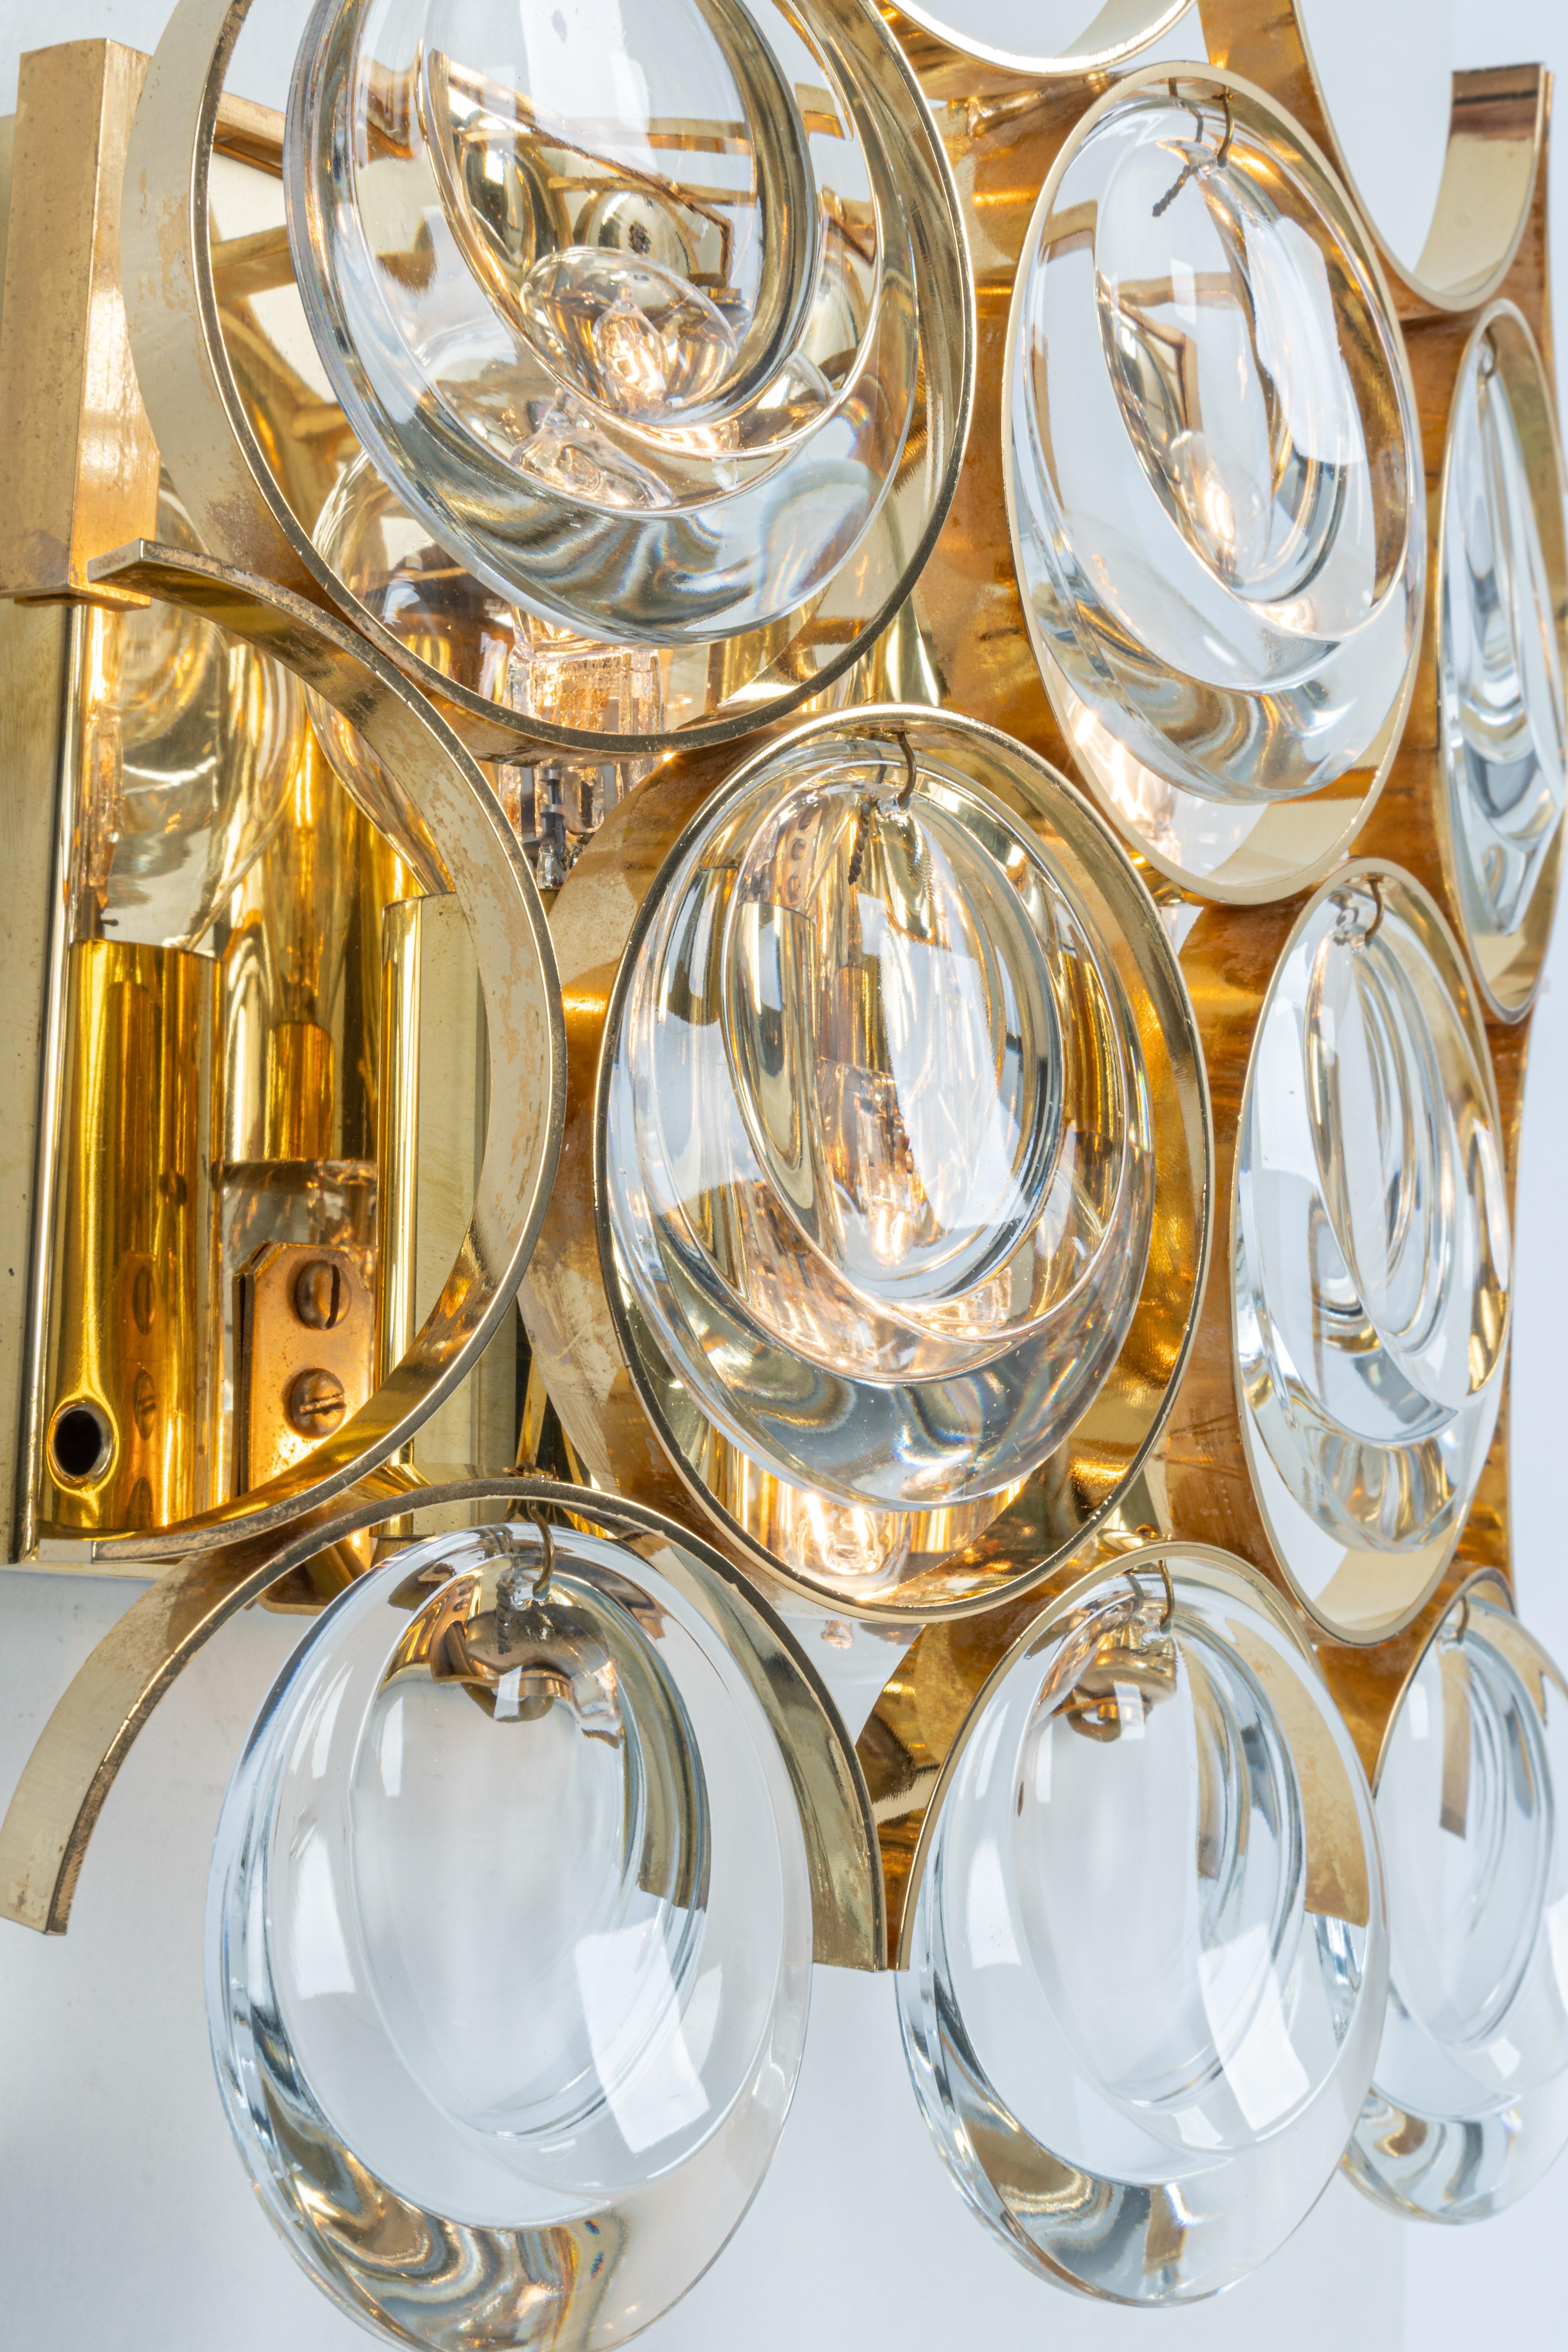 Brass 1 of 3 Pairs of Crystal Wall Lights, Sciolari Design, Palwa, Germany, 1960s For Sale